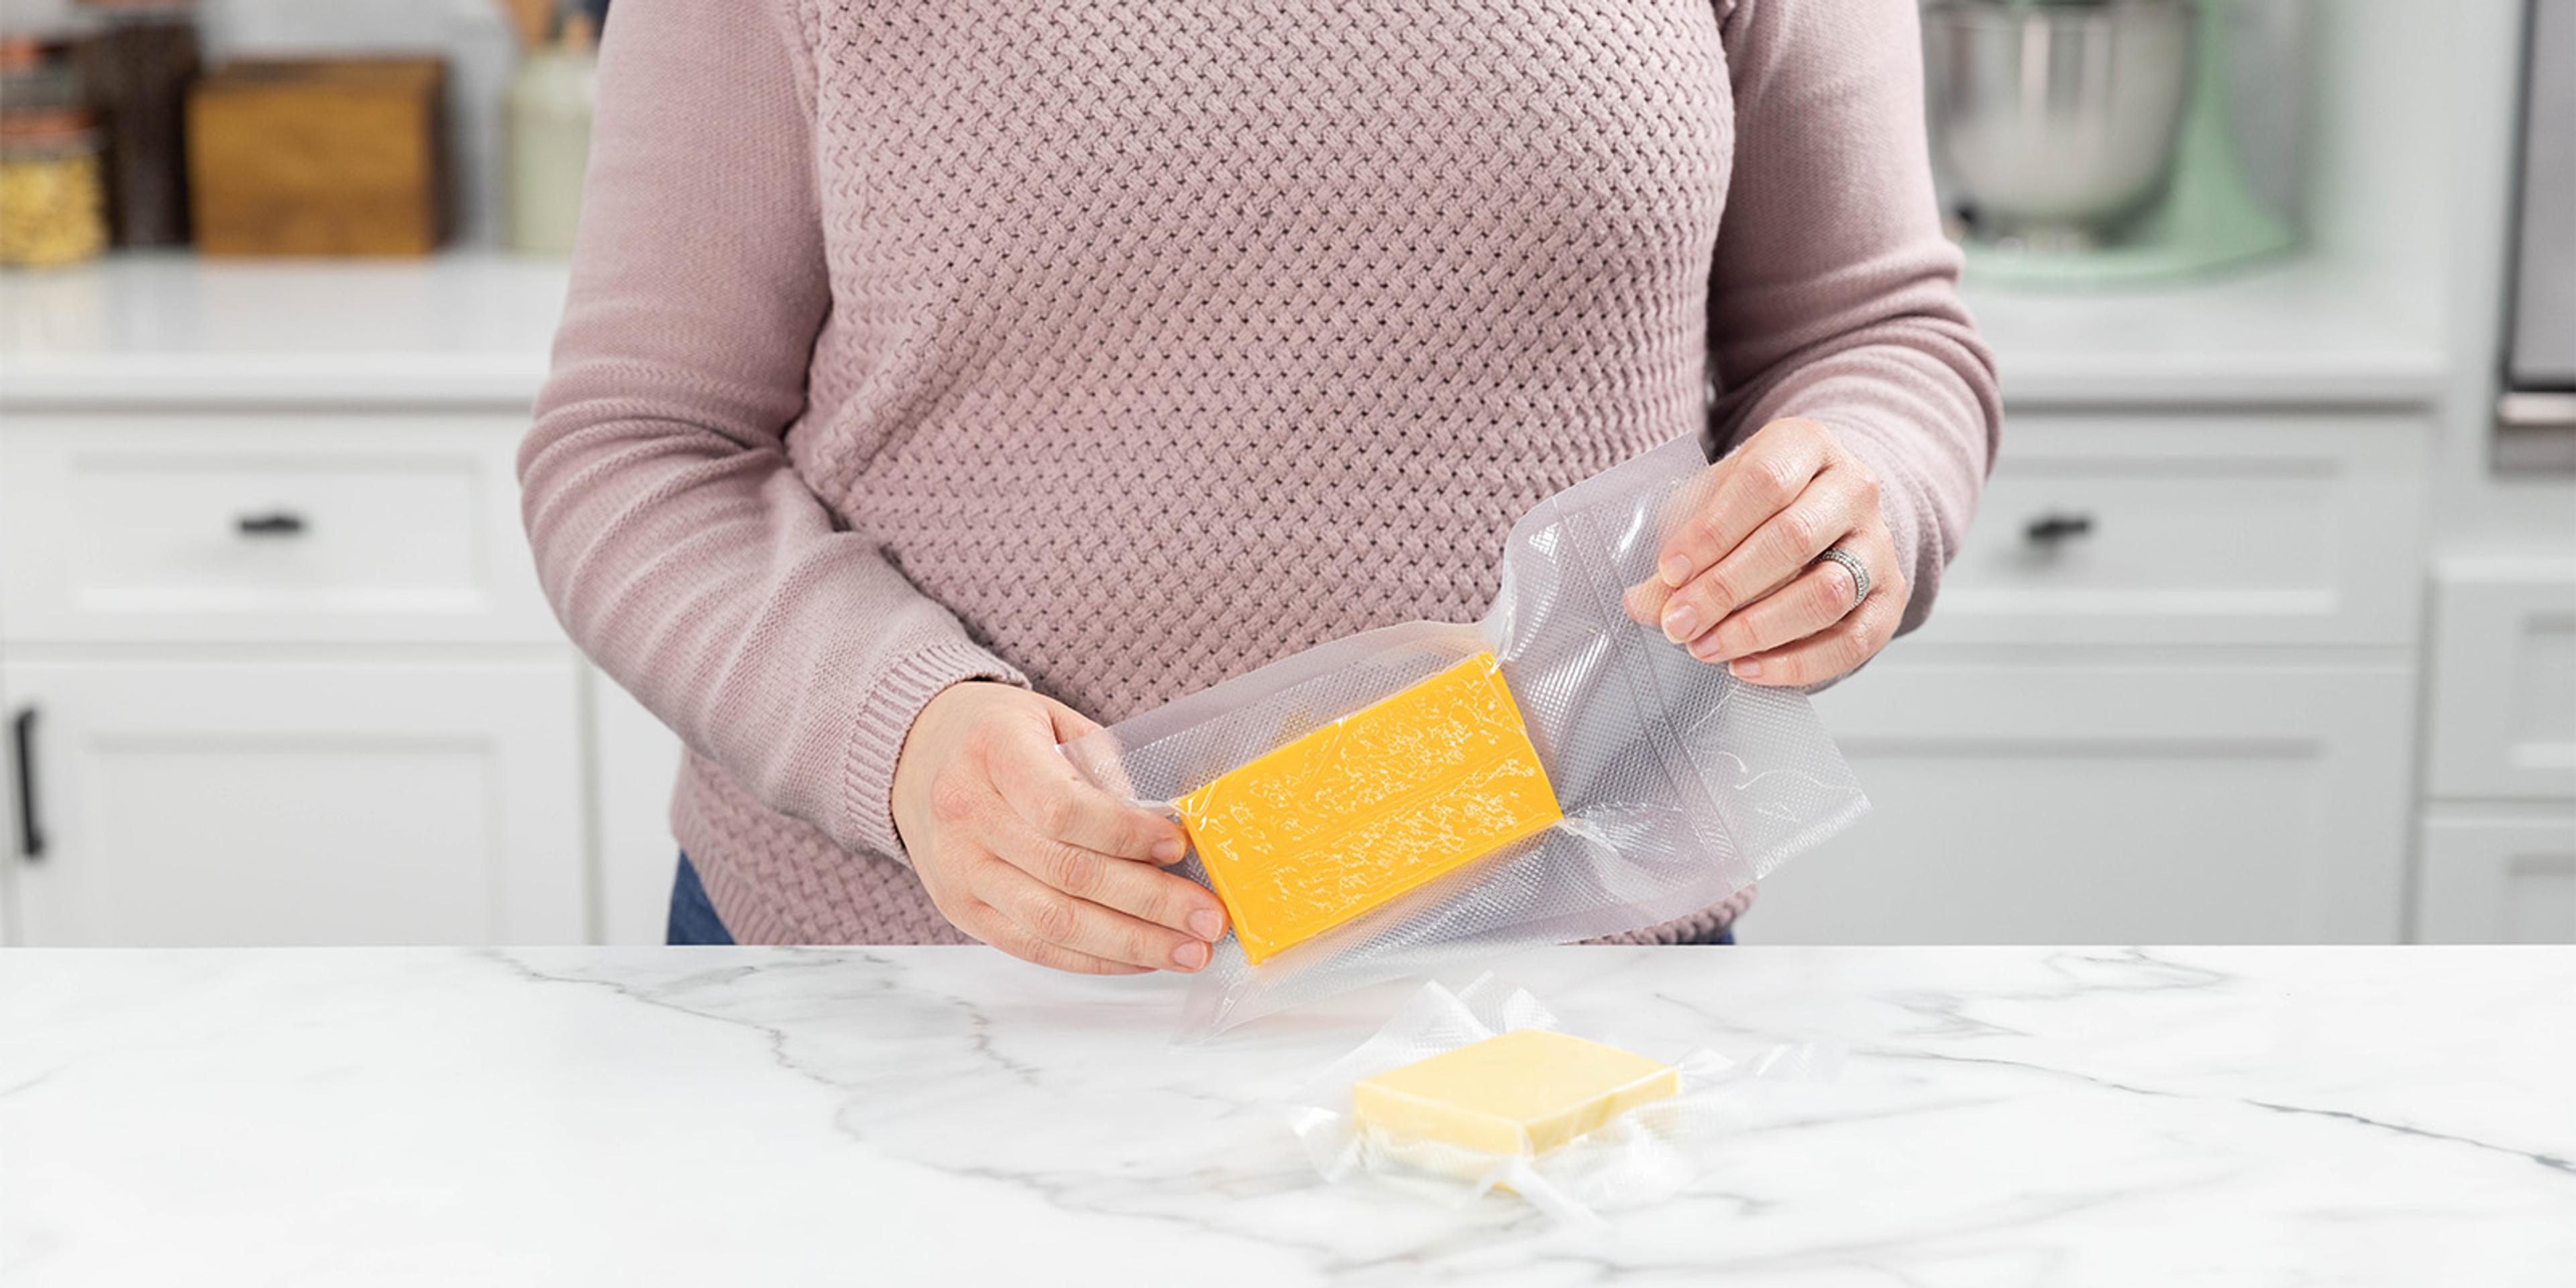 How to Store Cheese—Which Method Works Best?